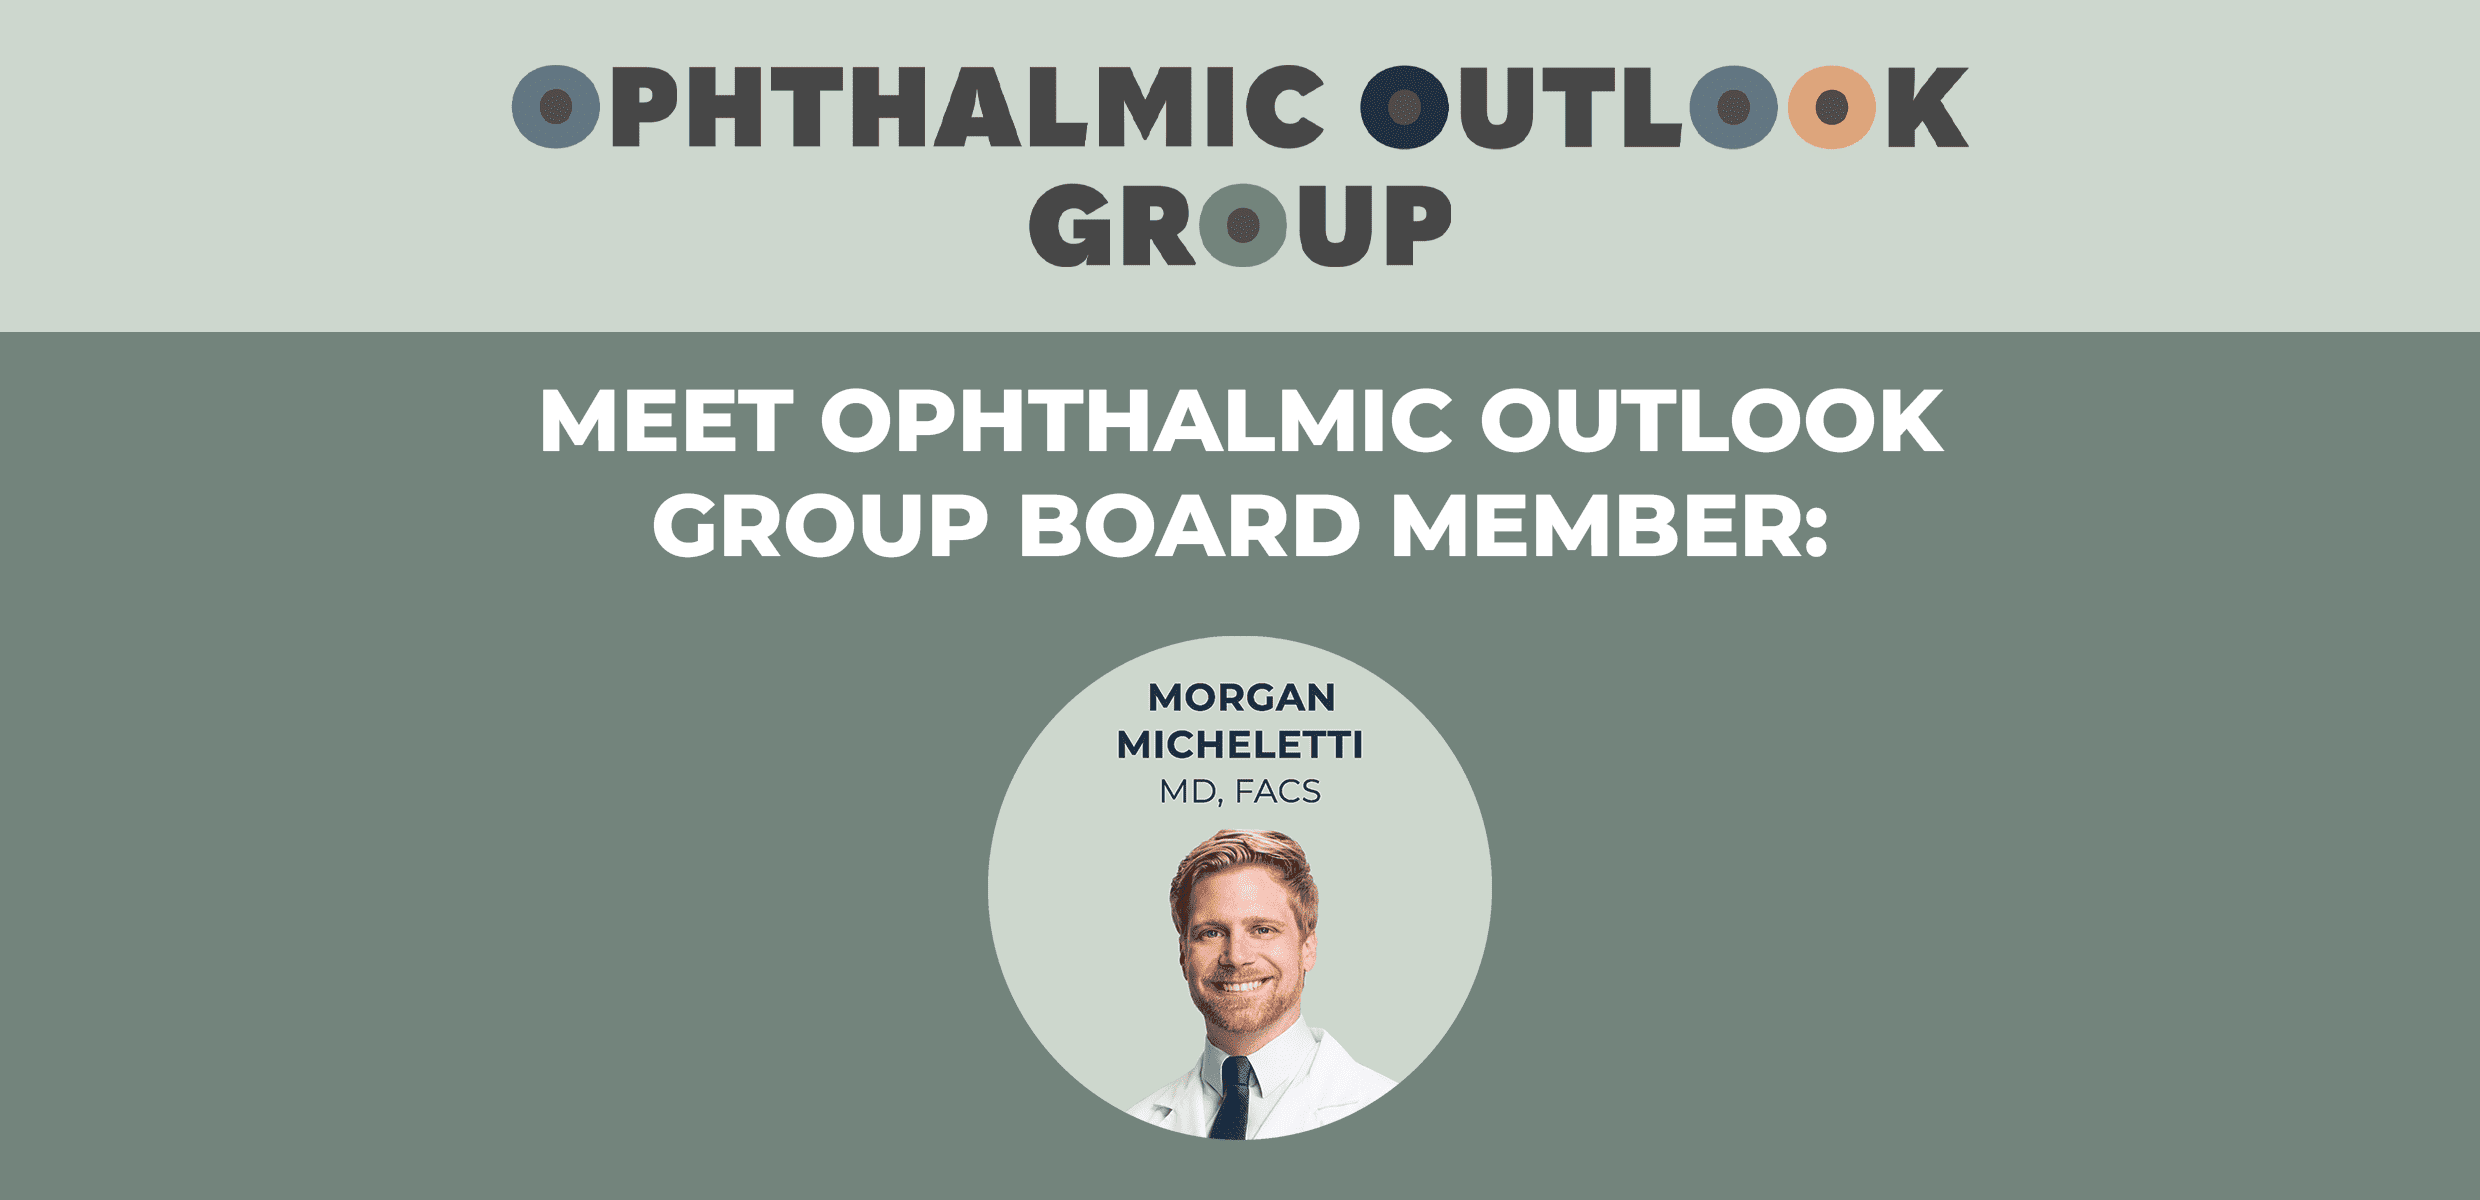 Meet Ophthalmic Outlook Group Board Member: Morgan Micheletti, MD, FACS